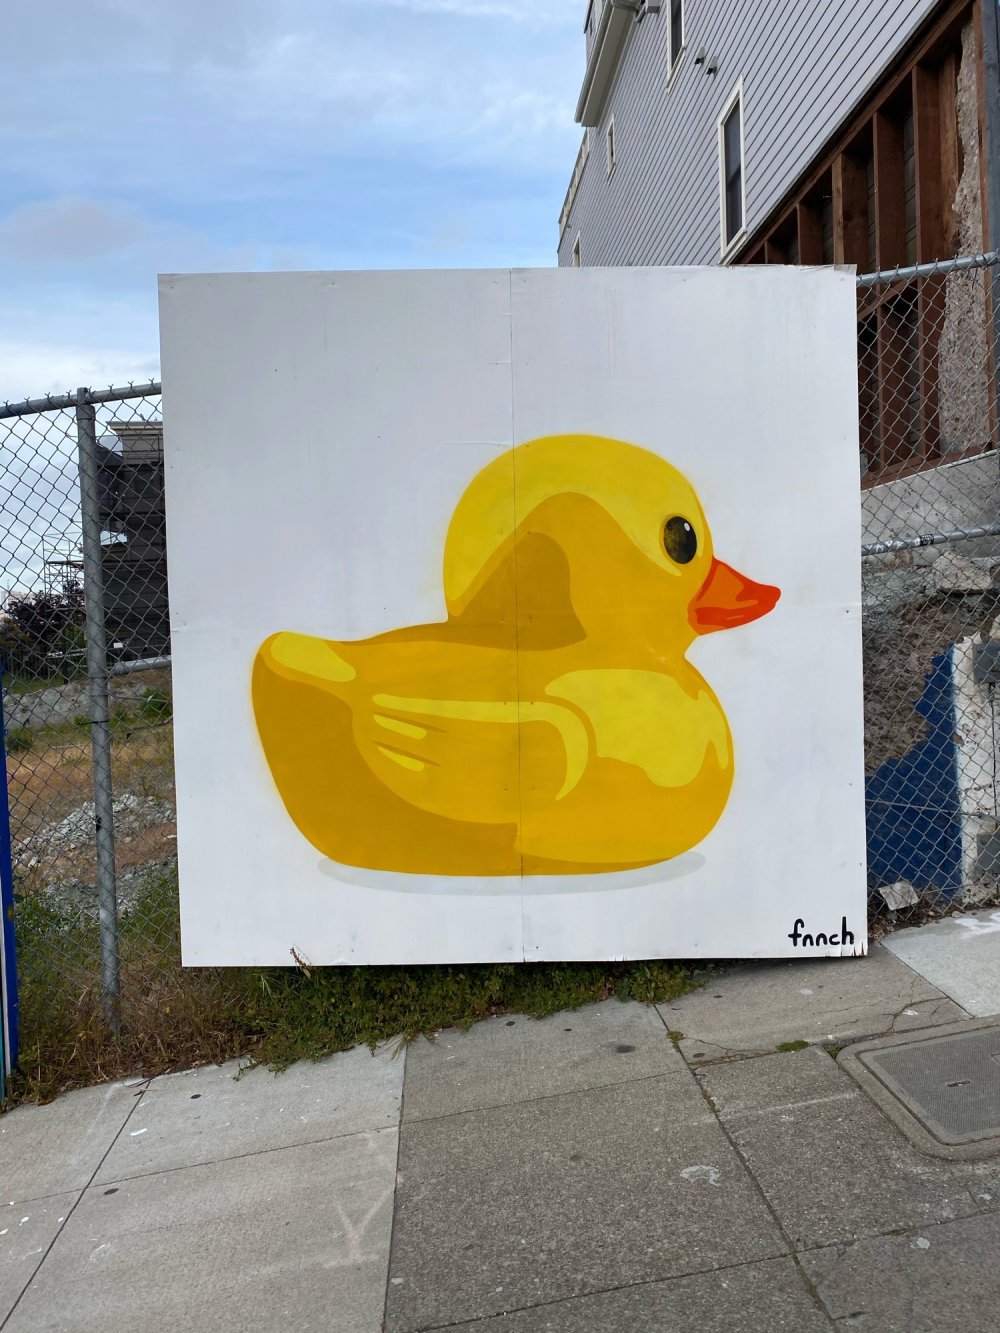 mural in San Francisco by artist fnnch.